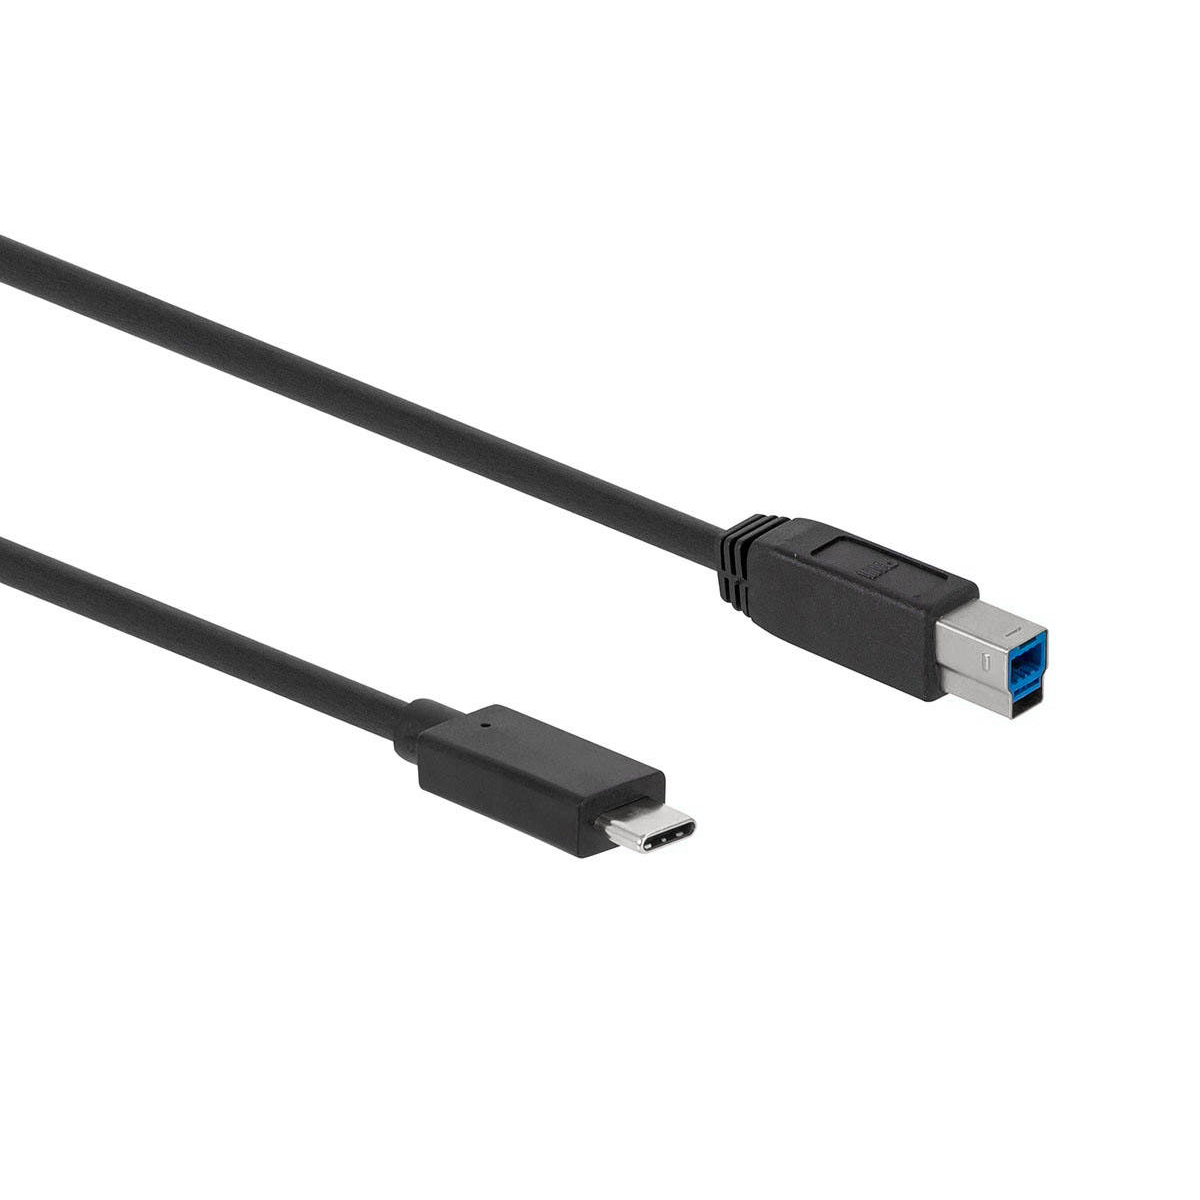 TYPE-C (USB C) to Micro USB Cable (Micro USB to USB-C Cable) 3.3 Feet in  Black